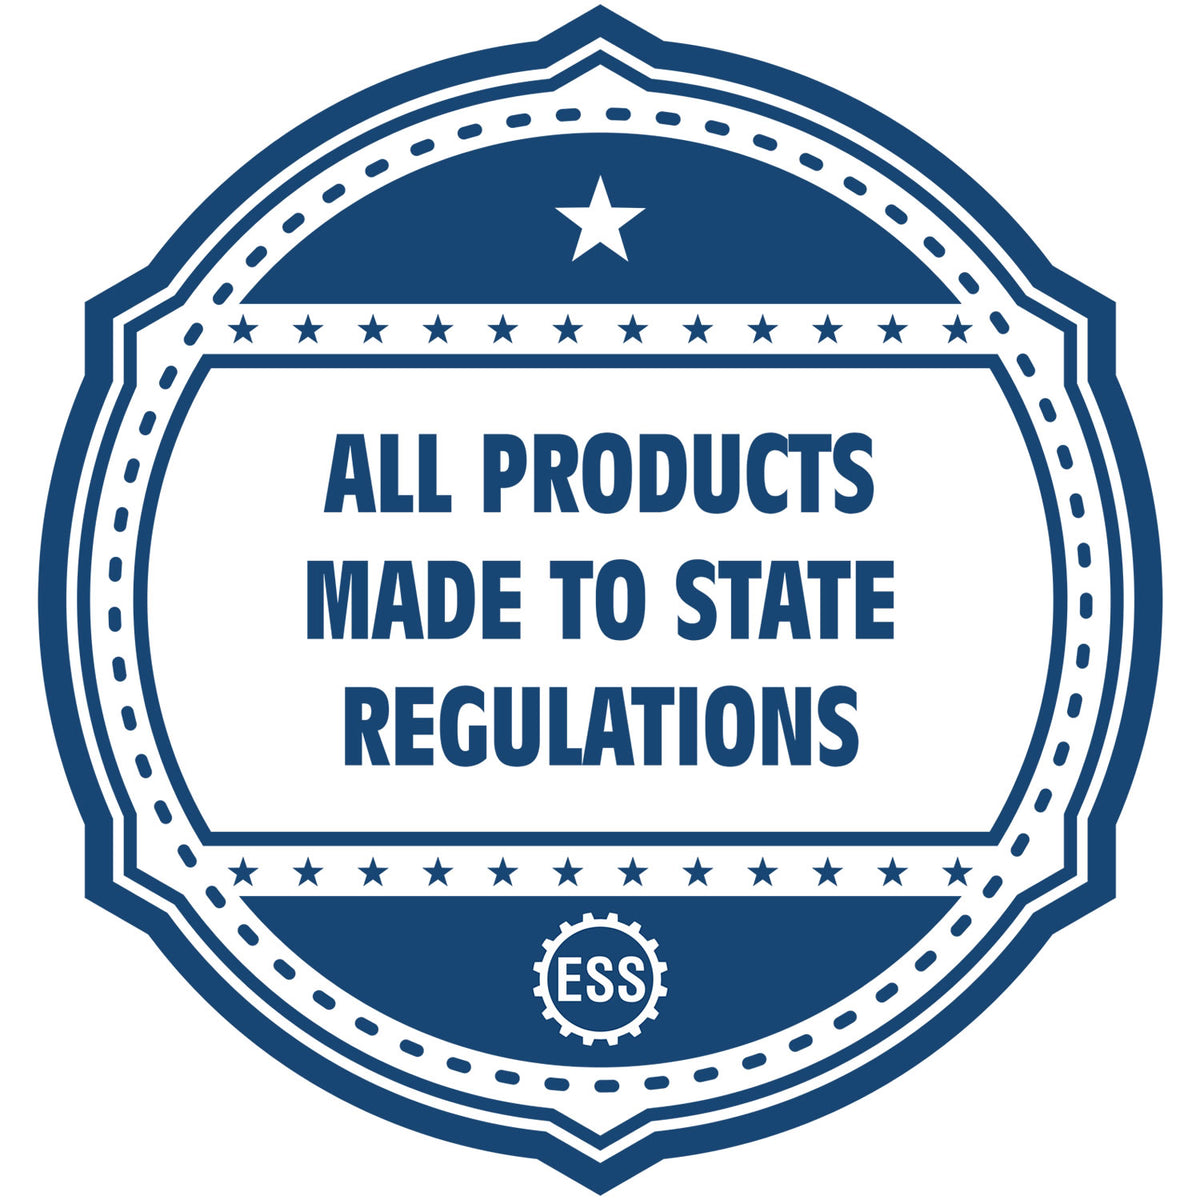 An icon or badge element for the State of Rhode Island Soft Land Surveyor Embossing Seal showing that this product is made in compliance with state regulations.